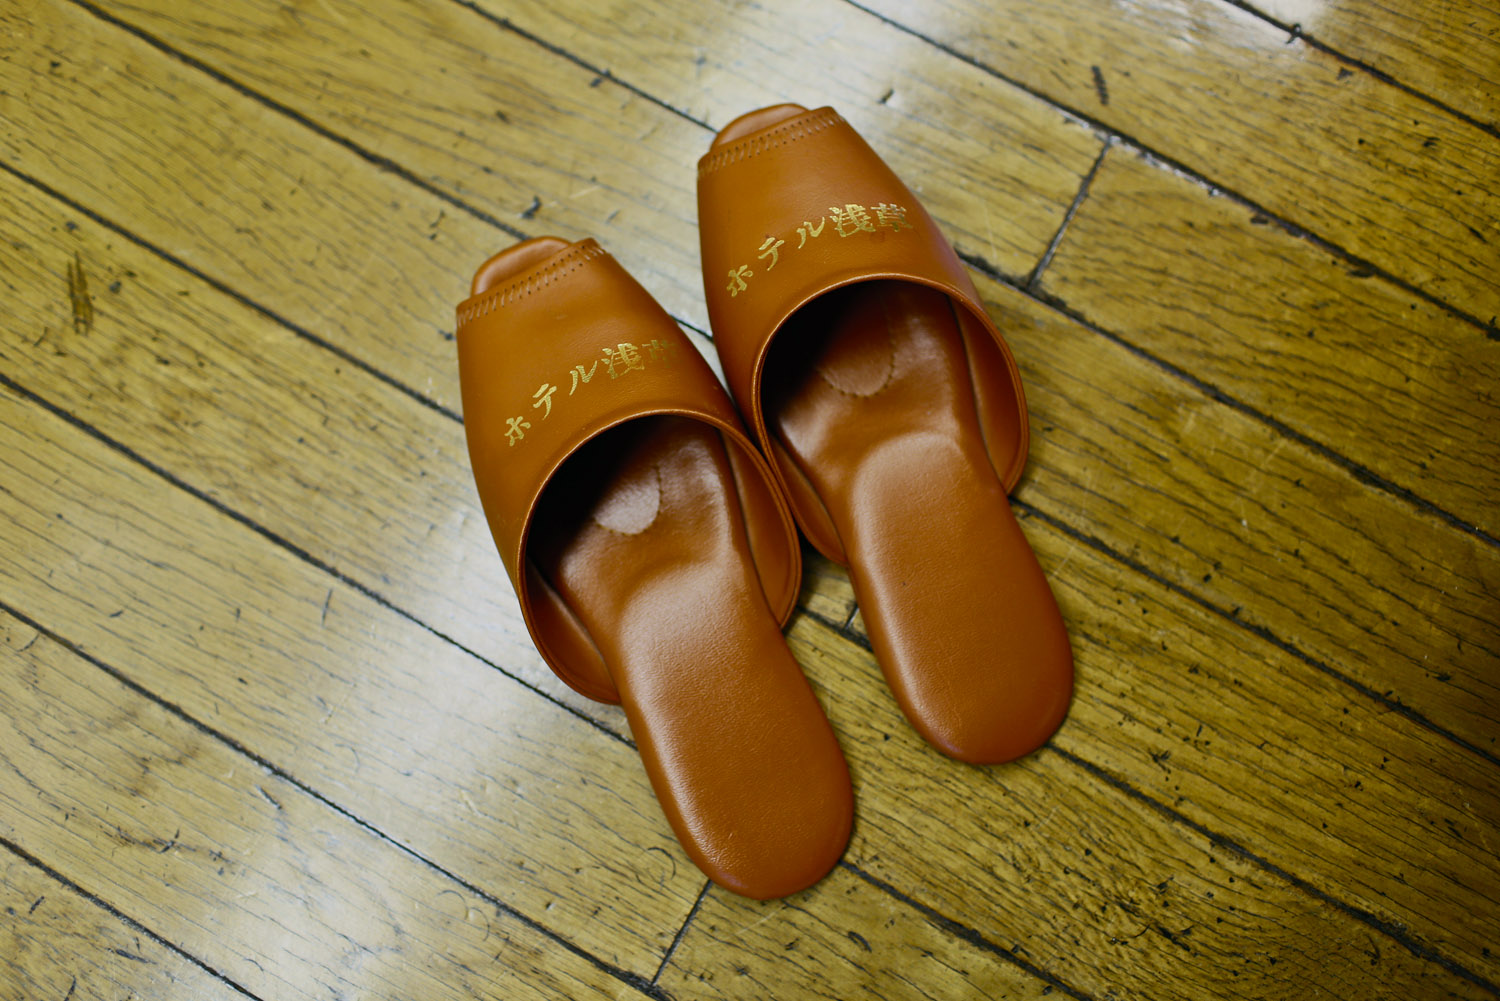 There are still thoughtful touches at Asakusa Hotel and Capsule, like guest slippers.